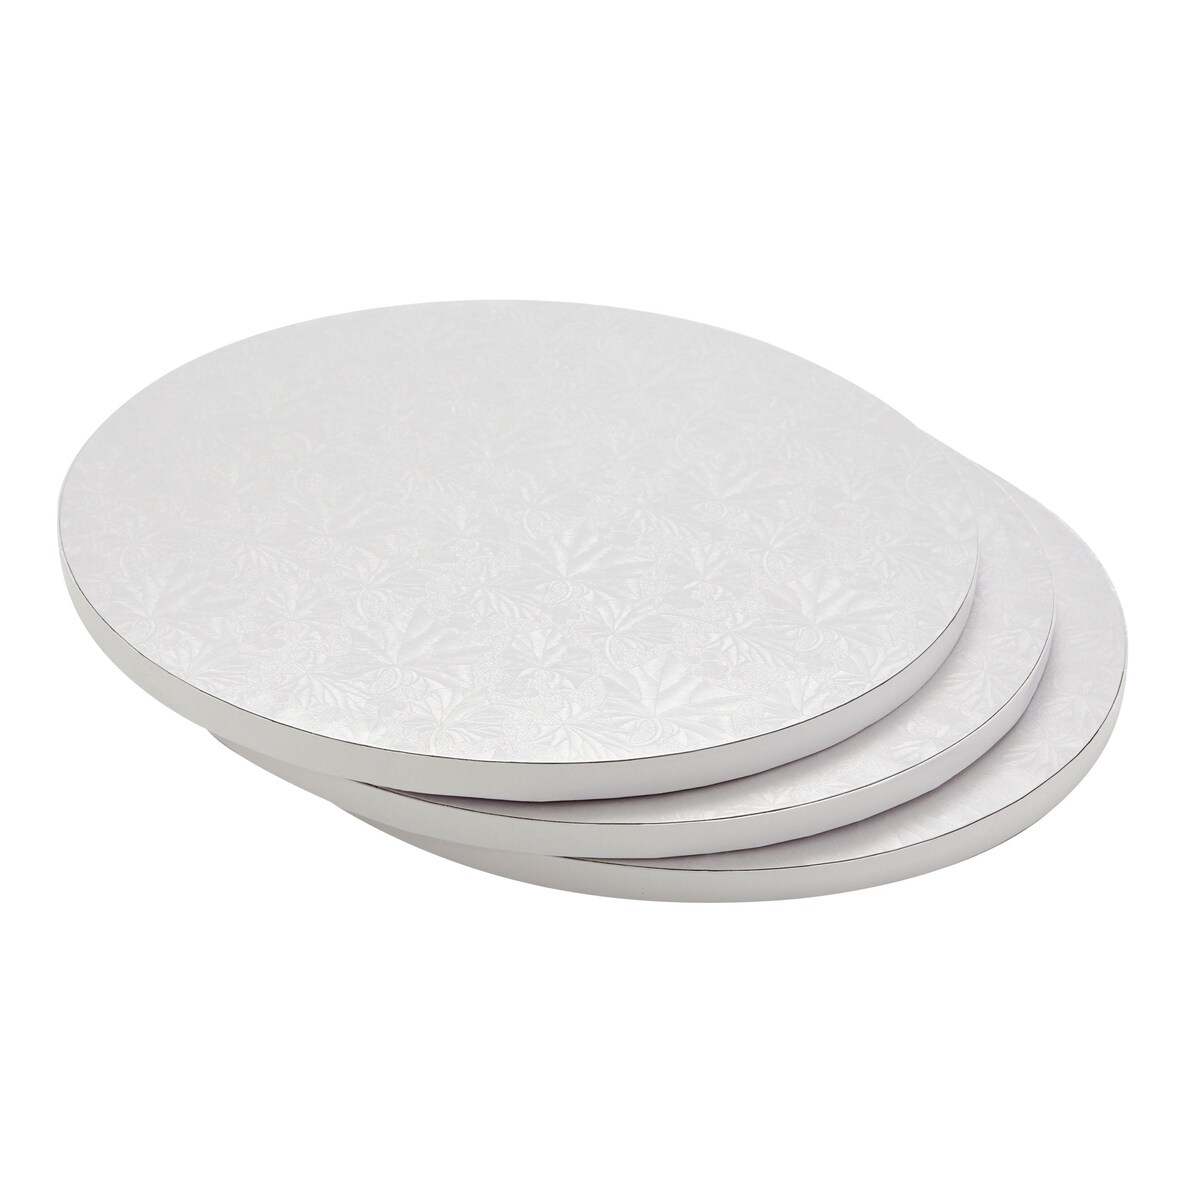 O'creme Cake Board, White Round Cake Circles With Gorgeous Design, Pack Of  5 Disposable Cake Drums : Target